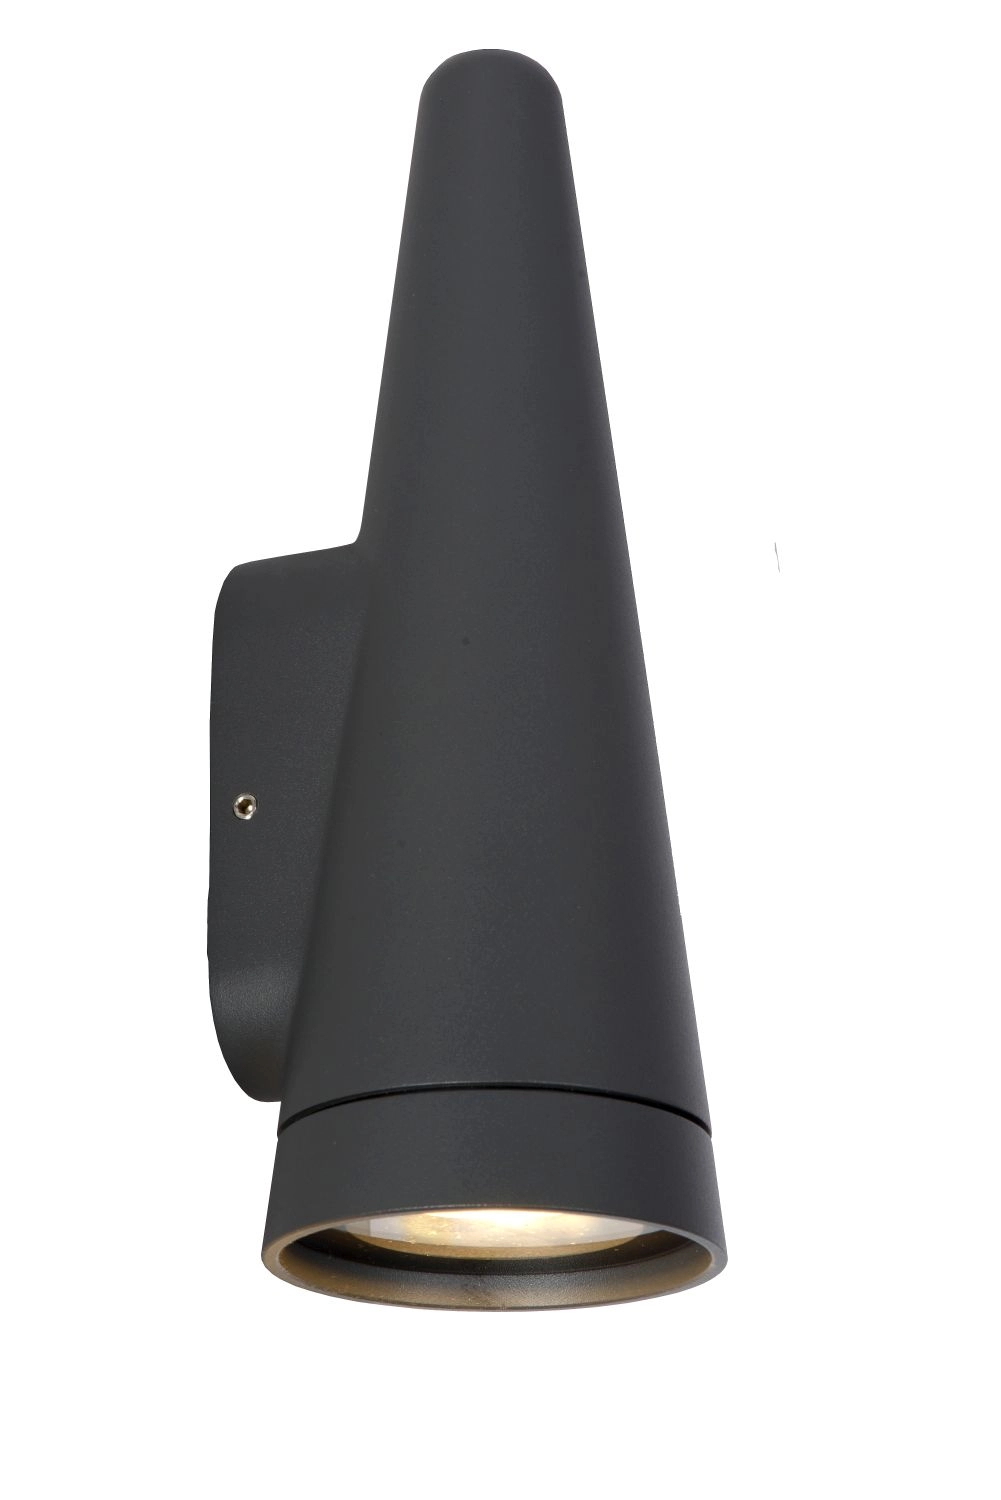 LU 27803/01/29 Lucide WIZARD - Wall light Outdoor - LED Dim. - 1xGU10 - IP54 - Anthracite